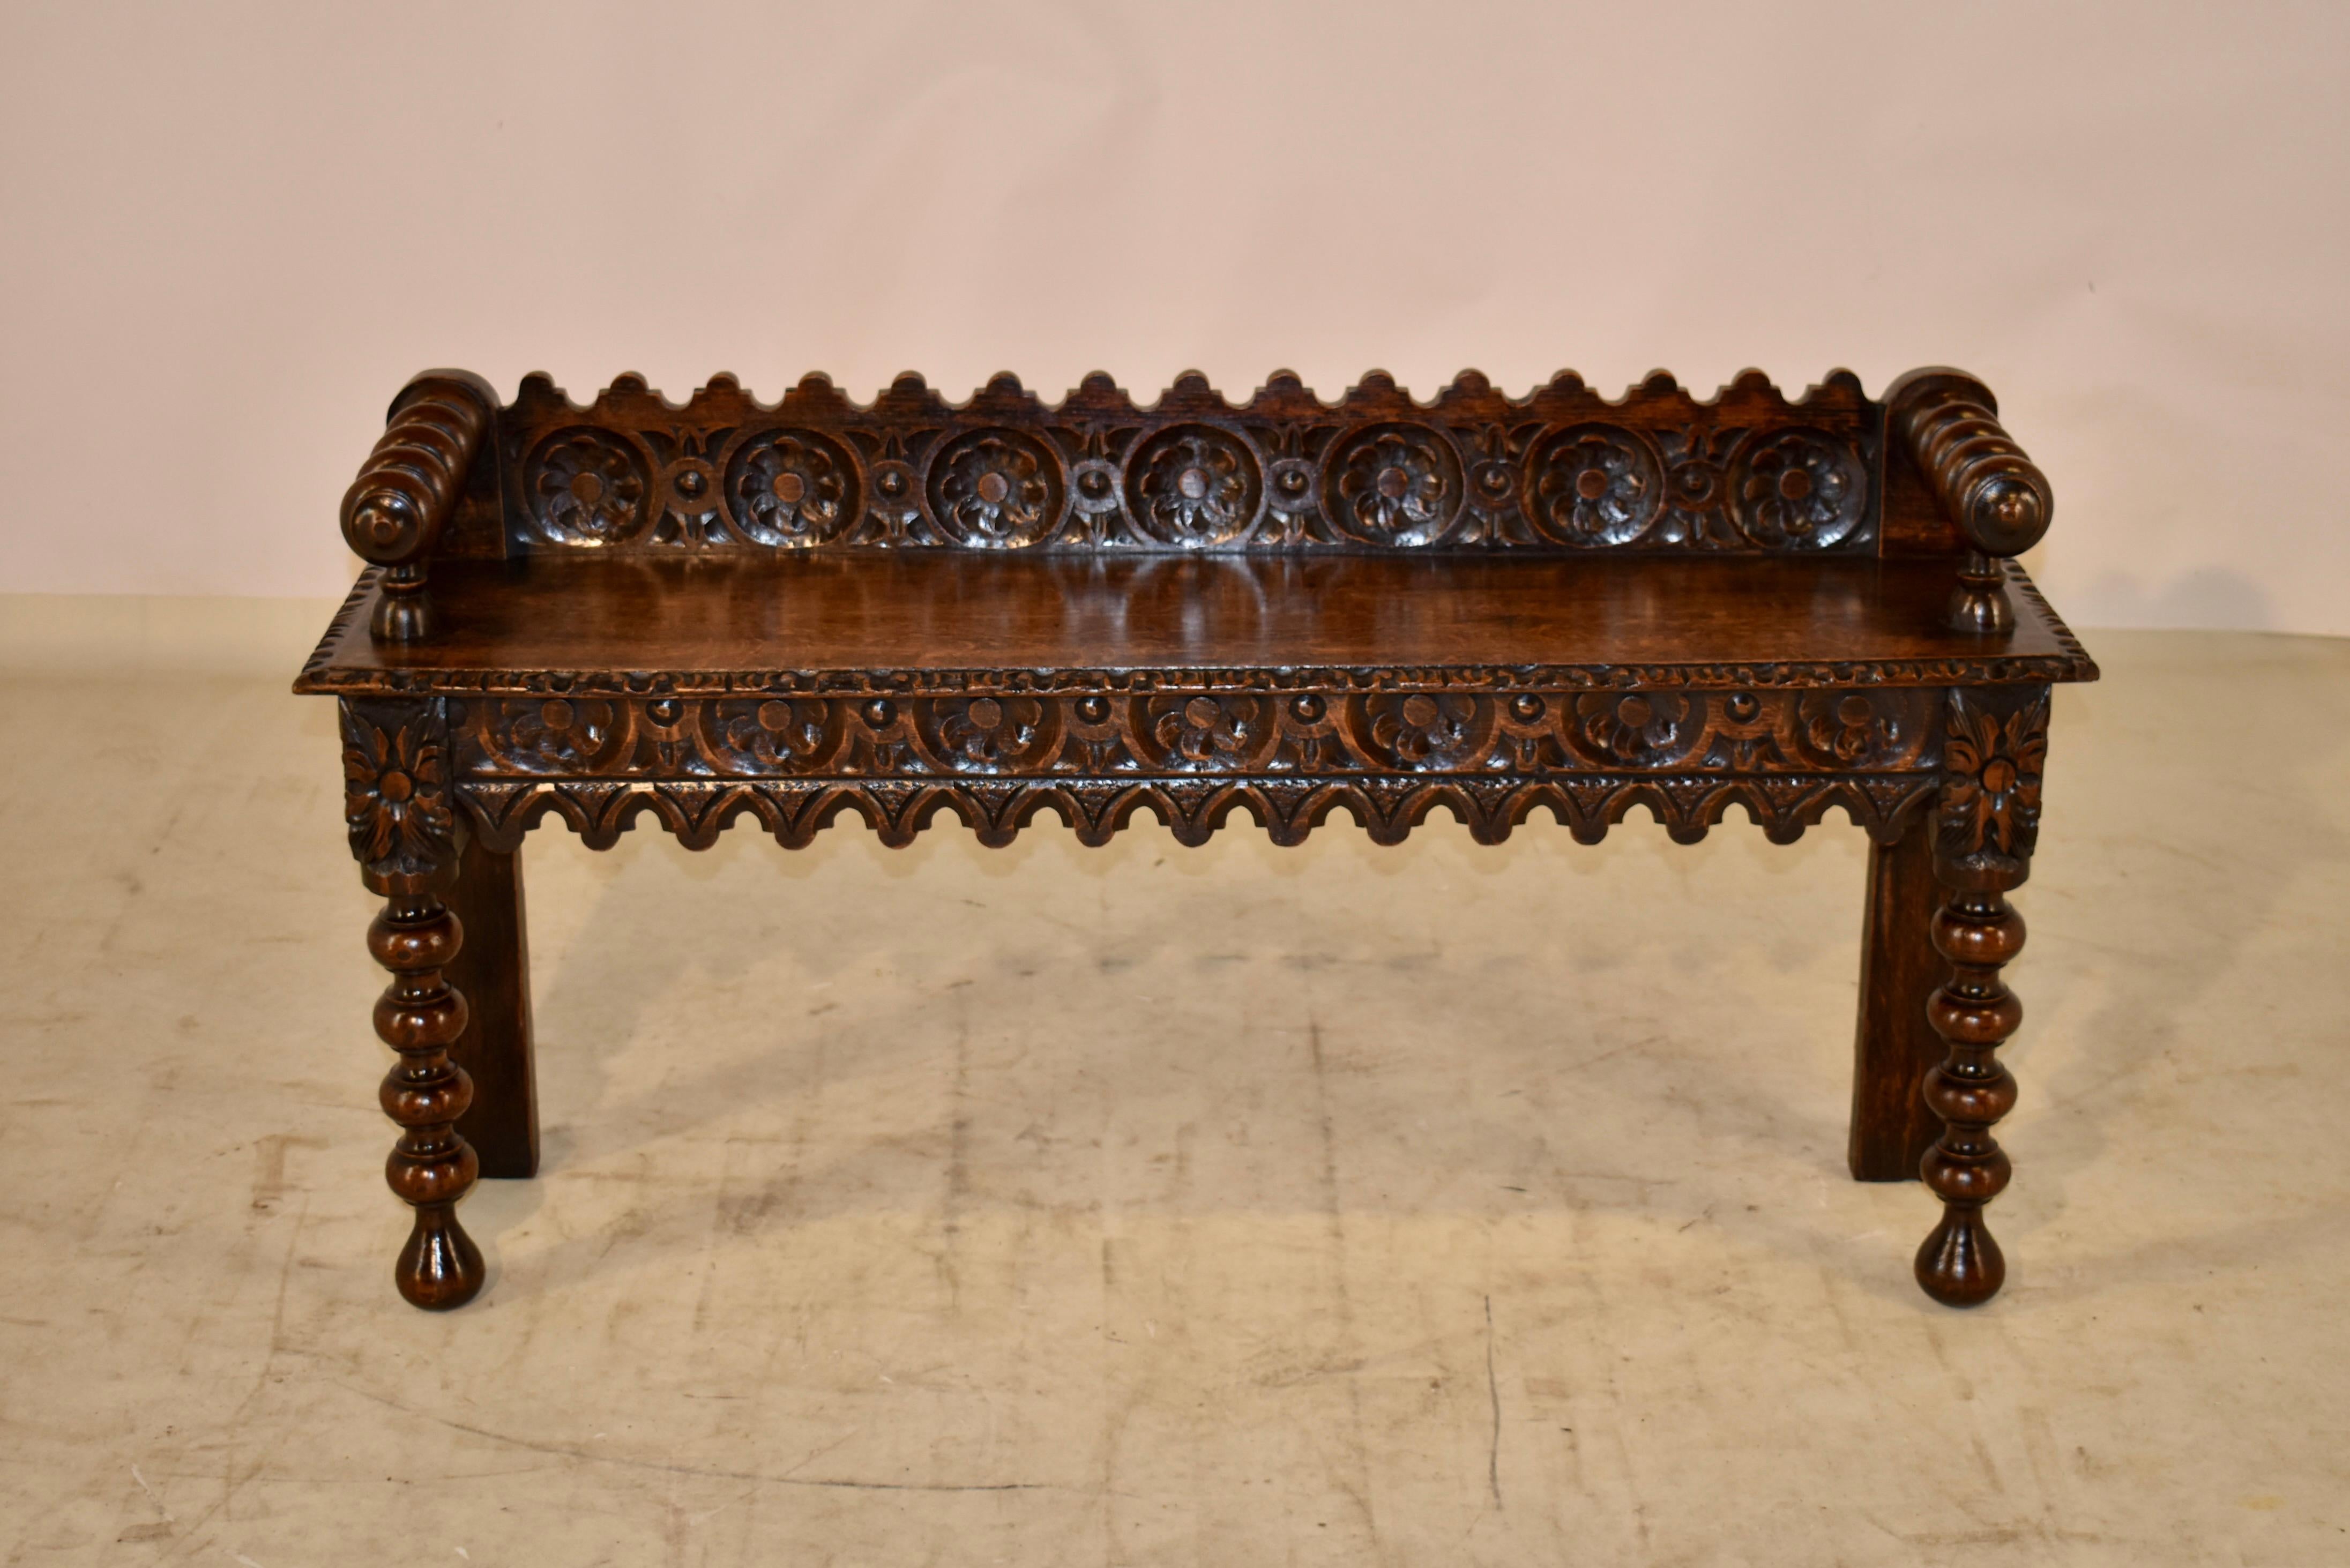 19th Century English oak carved window seat with a lovely hand-carved and scalloped back, following down to hand turned arms, which are resting upon the seat. the arm height is 24.5 inches. The seat has a hand carved and beveled edge over a gorgeous